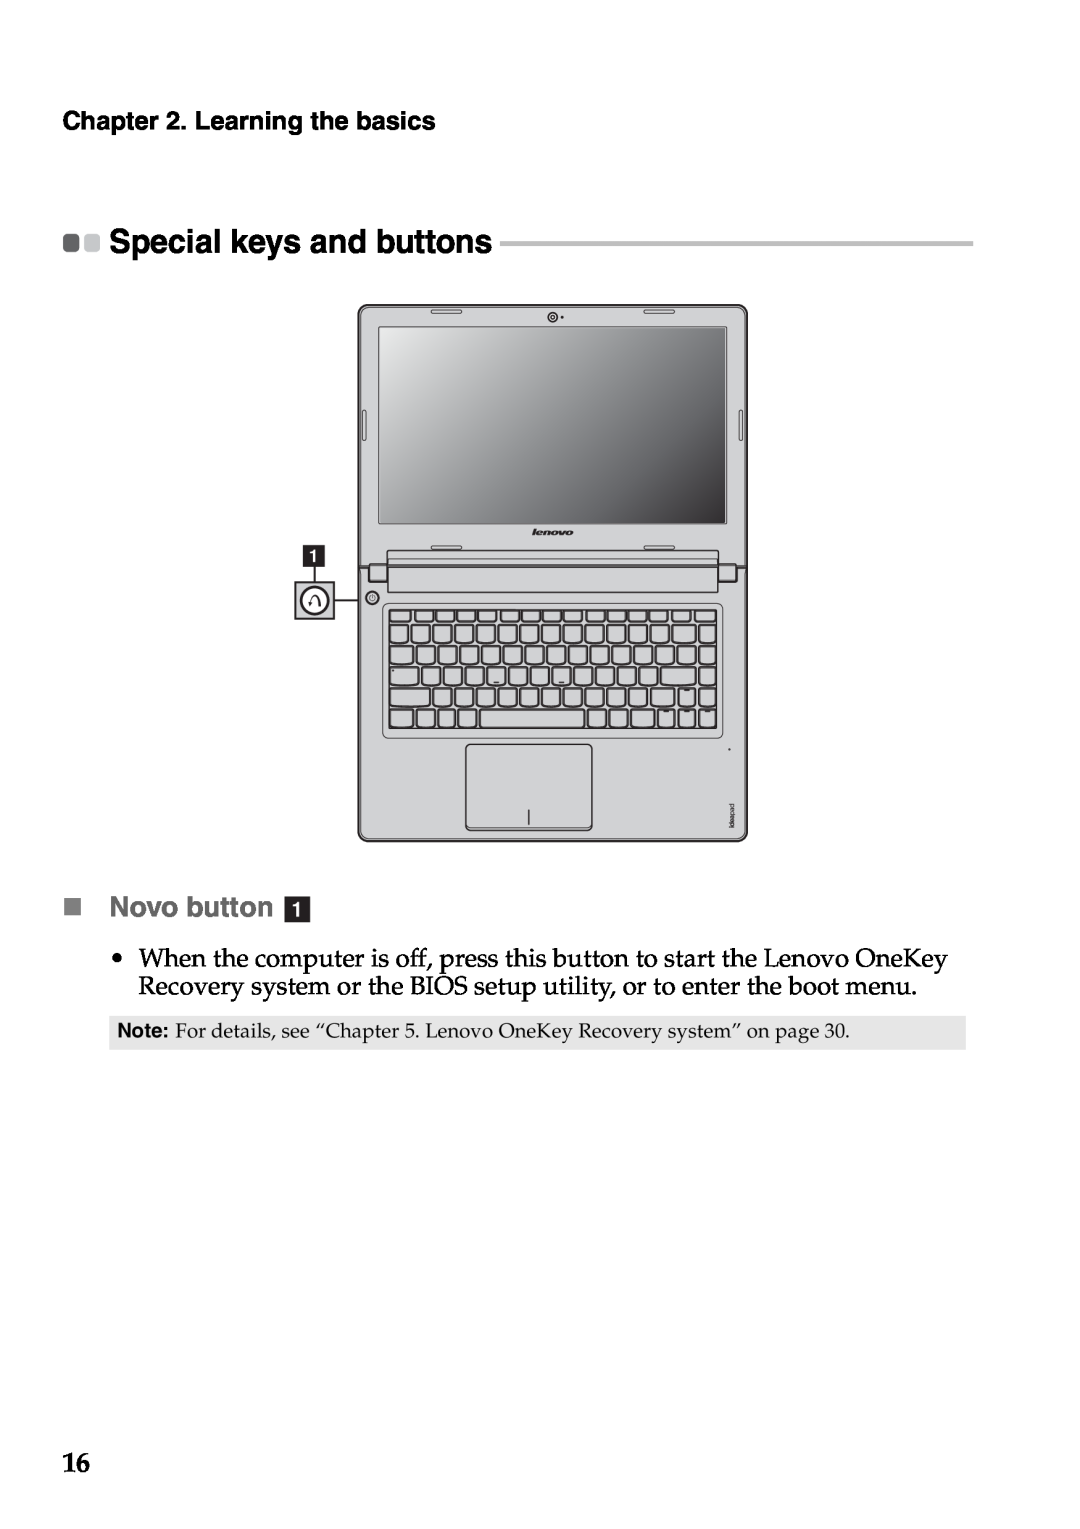 Lenovo S400U, 59RF0035 manual „ Novo button a, Special keys and buttons, Learning the basics 